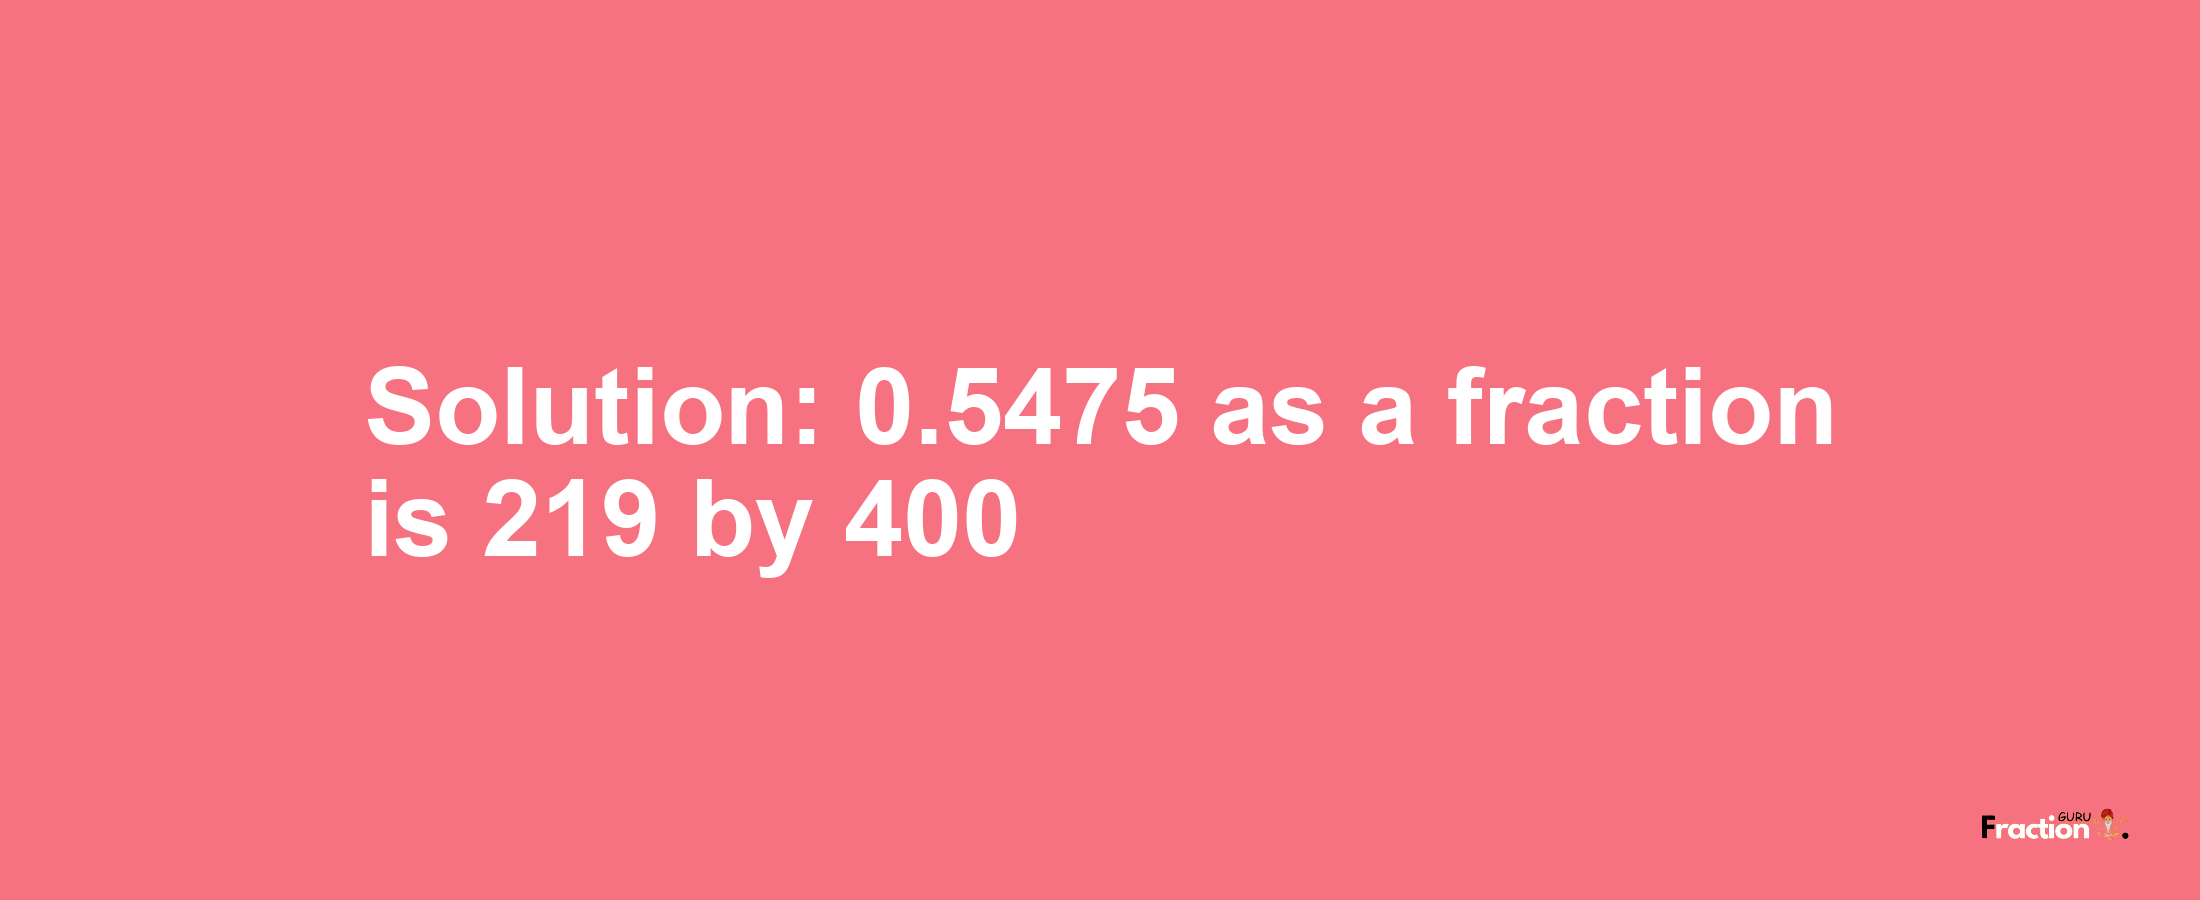 Solution:0.5475 as a fraction is 219/400